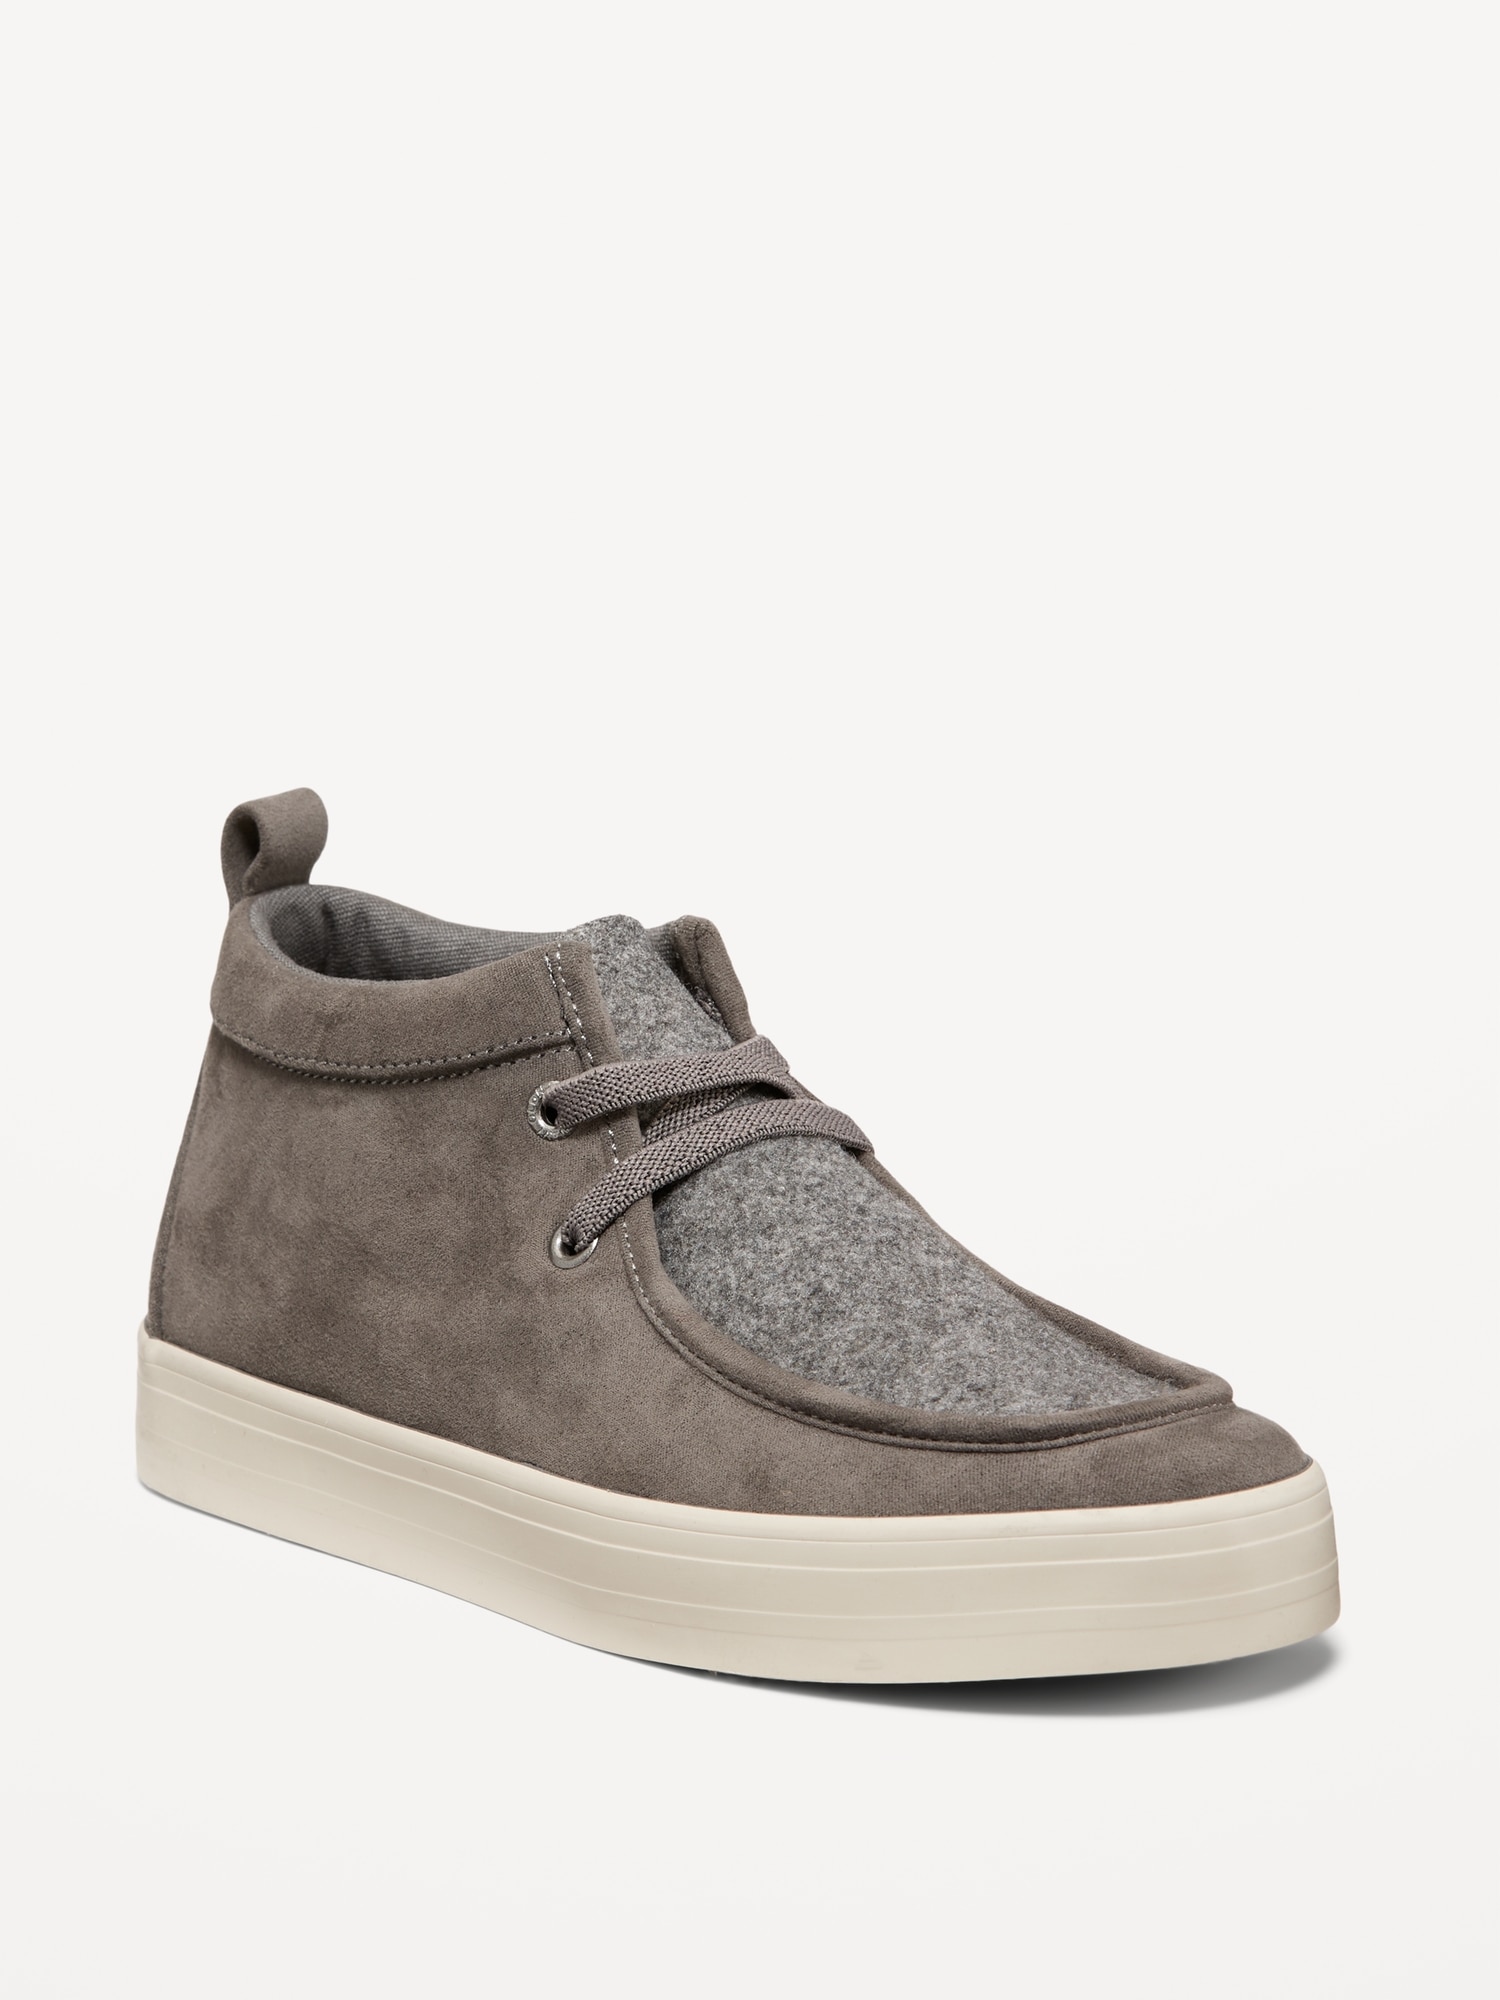 High-Top Faux-Suede Elastic-Lace Sneakers for Boys